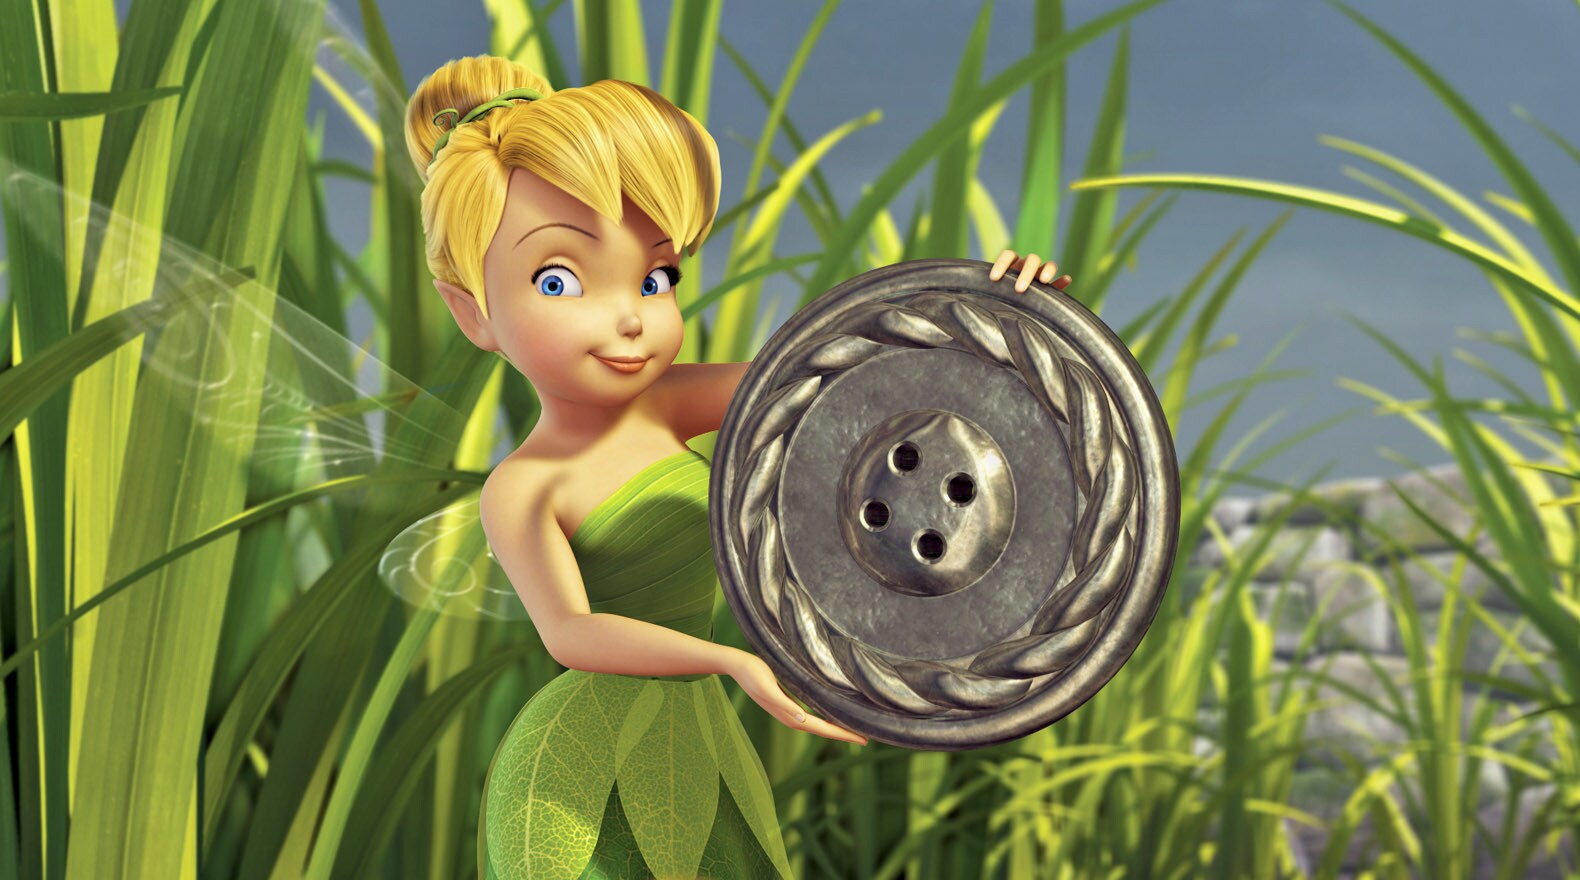 Tinker Bell stumbles across a path of buttons when out exploring.